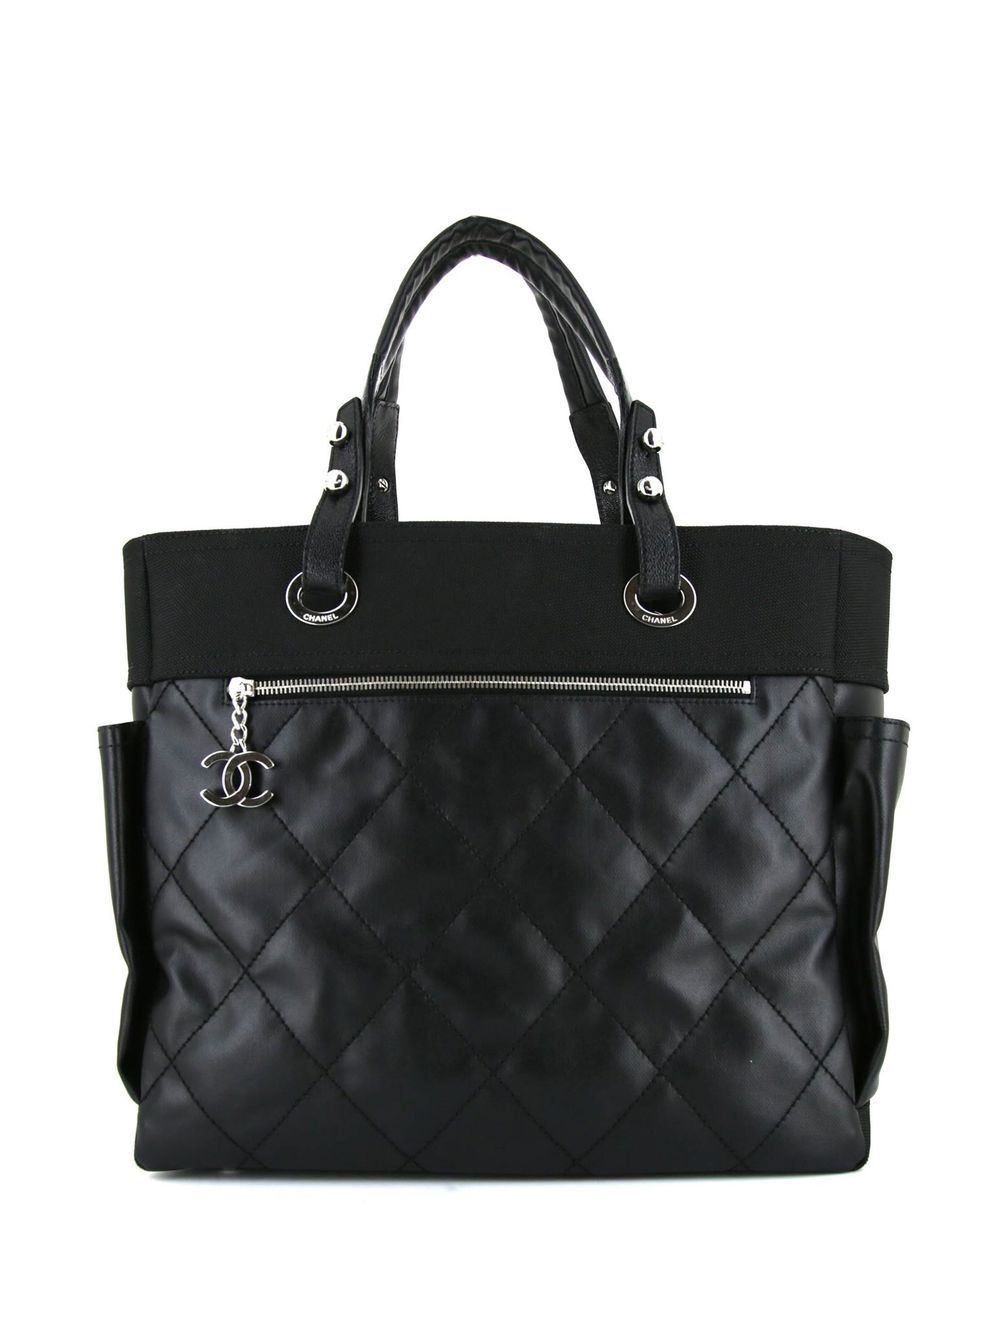 CHANEL Pre-Owned 2013 Biarritz panelled tote bag - Black